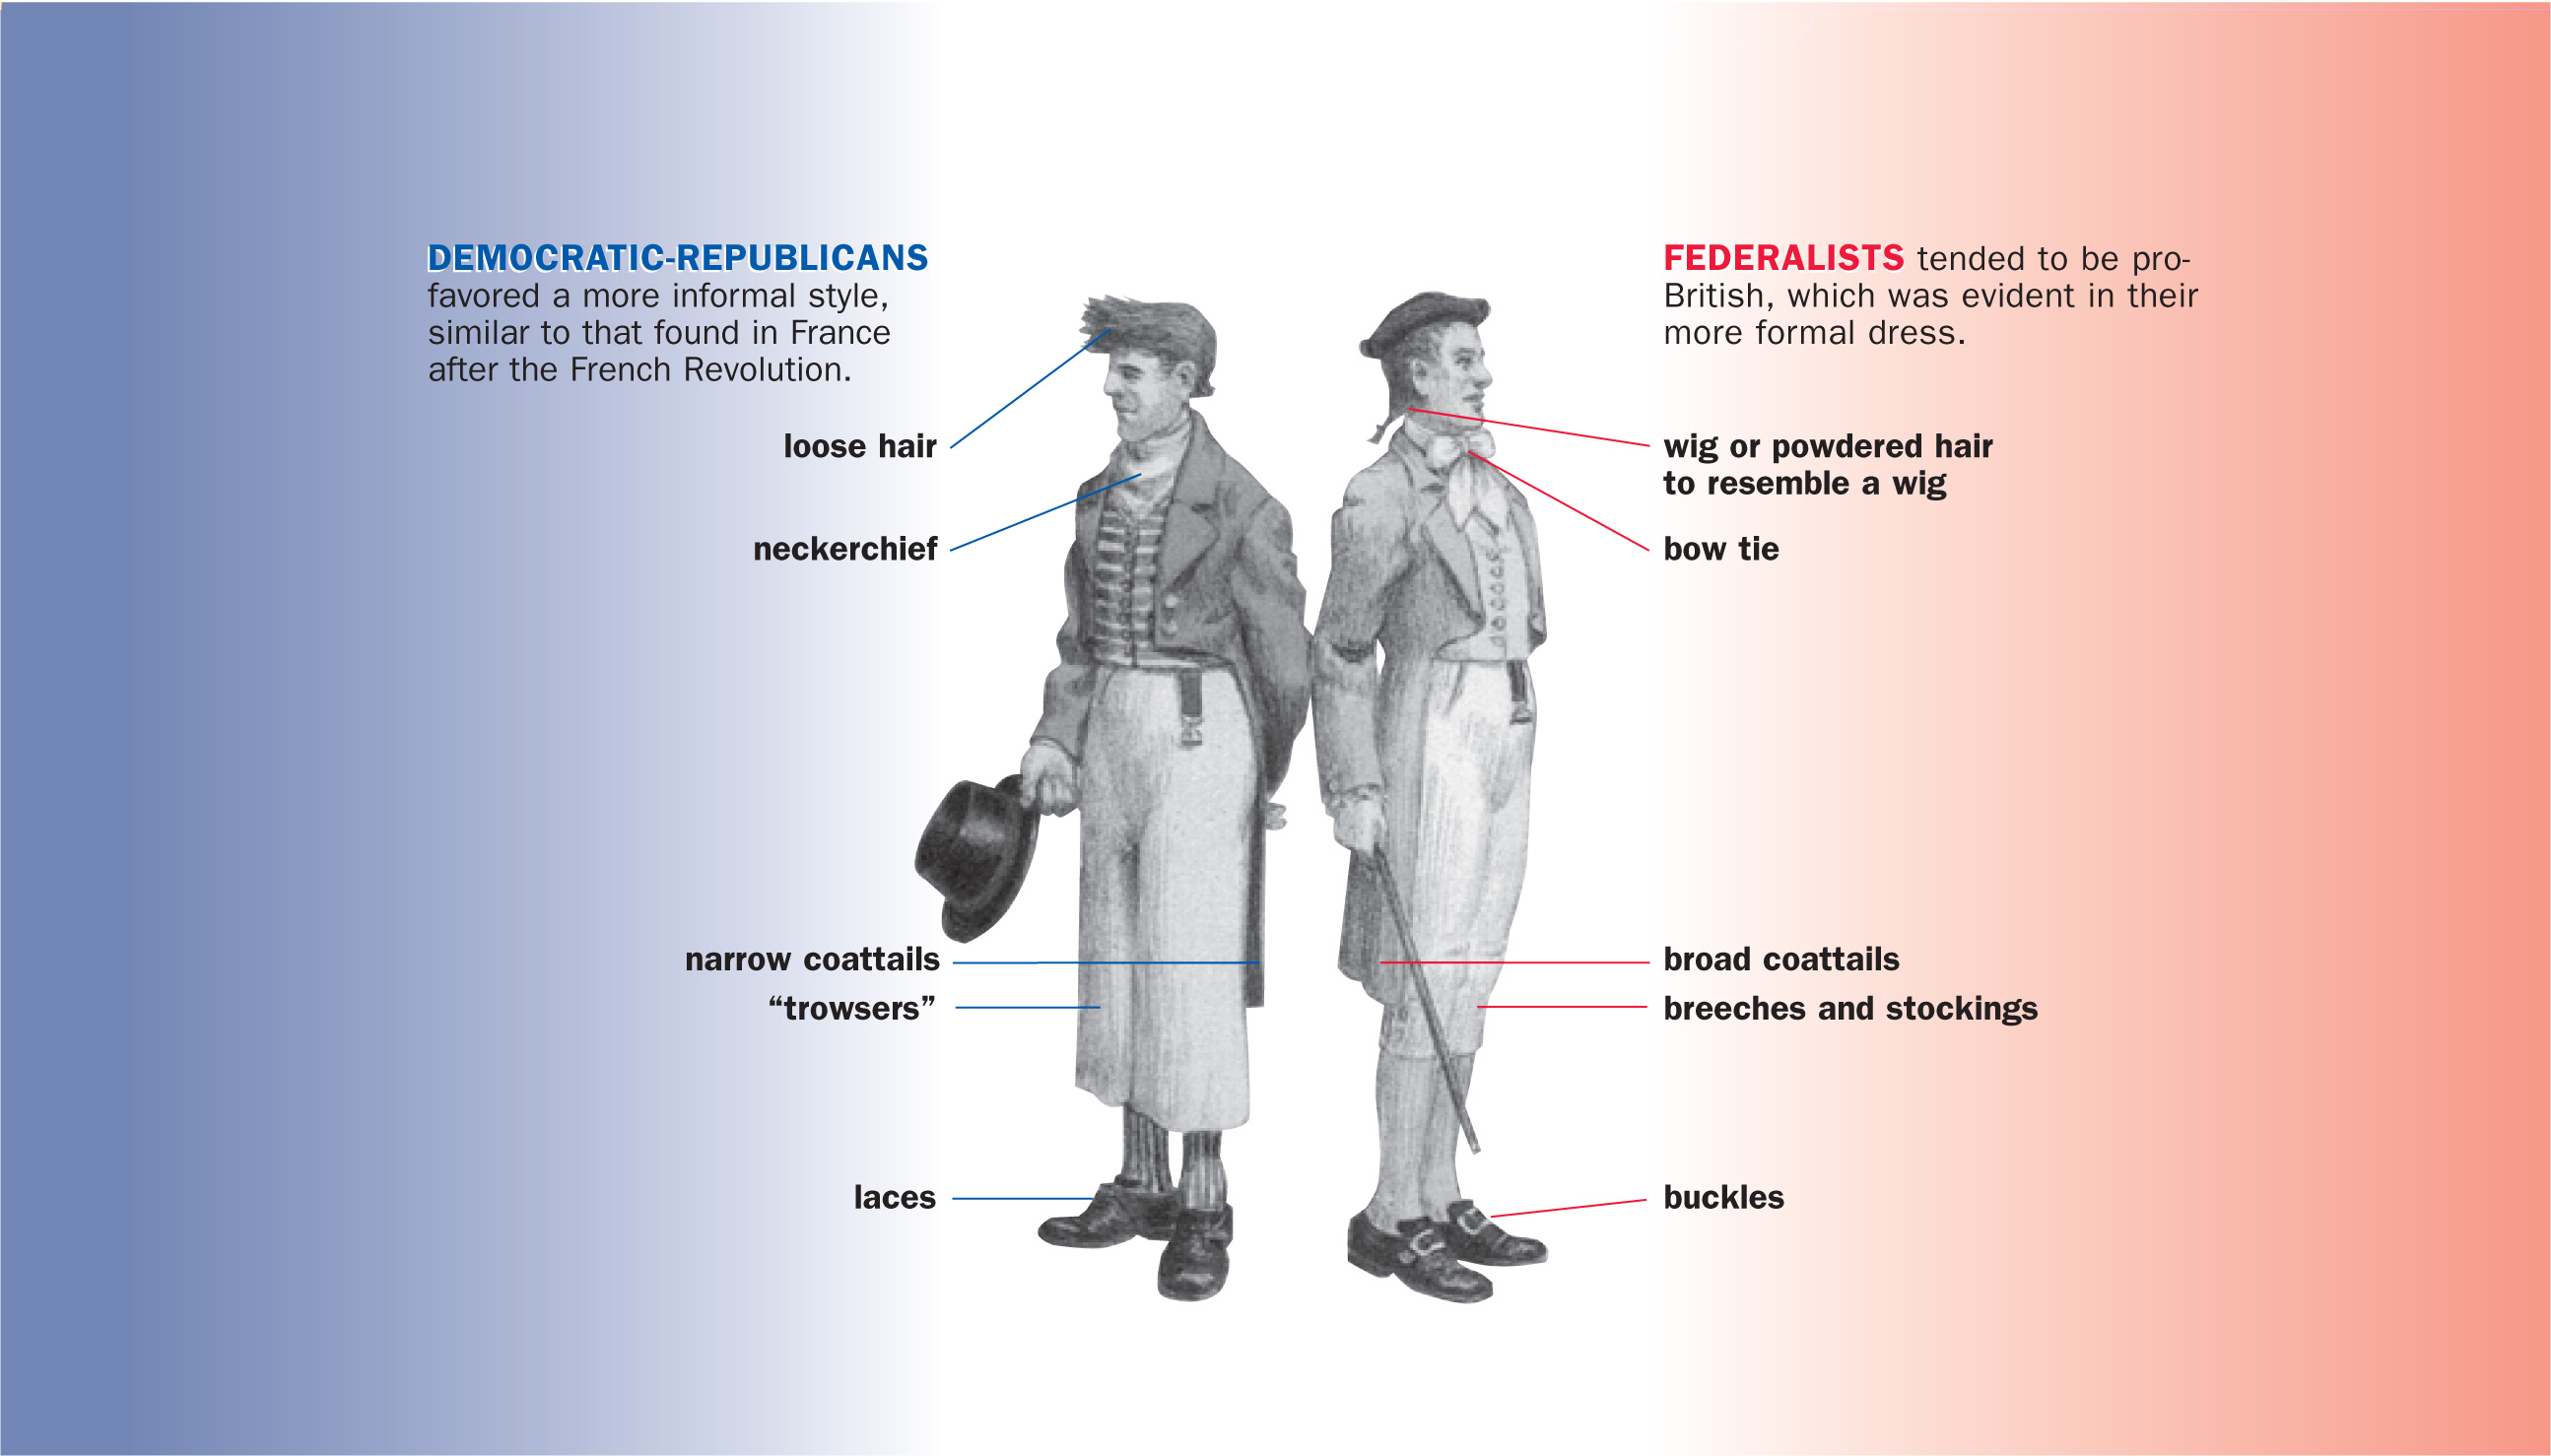 A drawing shows the different clothing of two men, a
Democratic Republican and a Federalist.